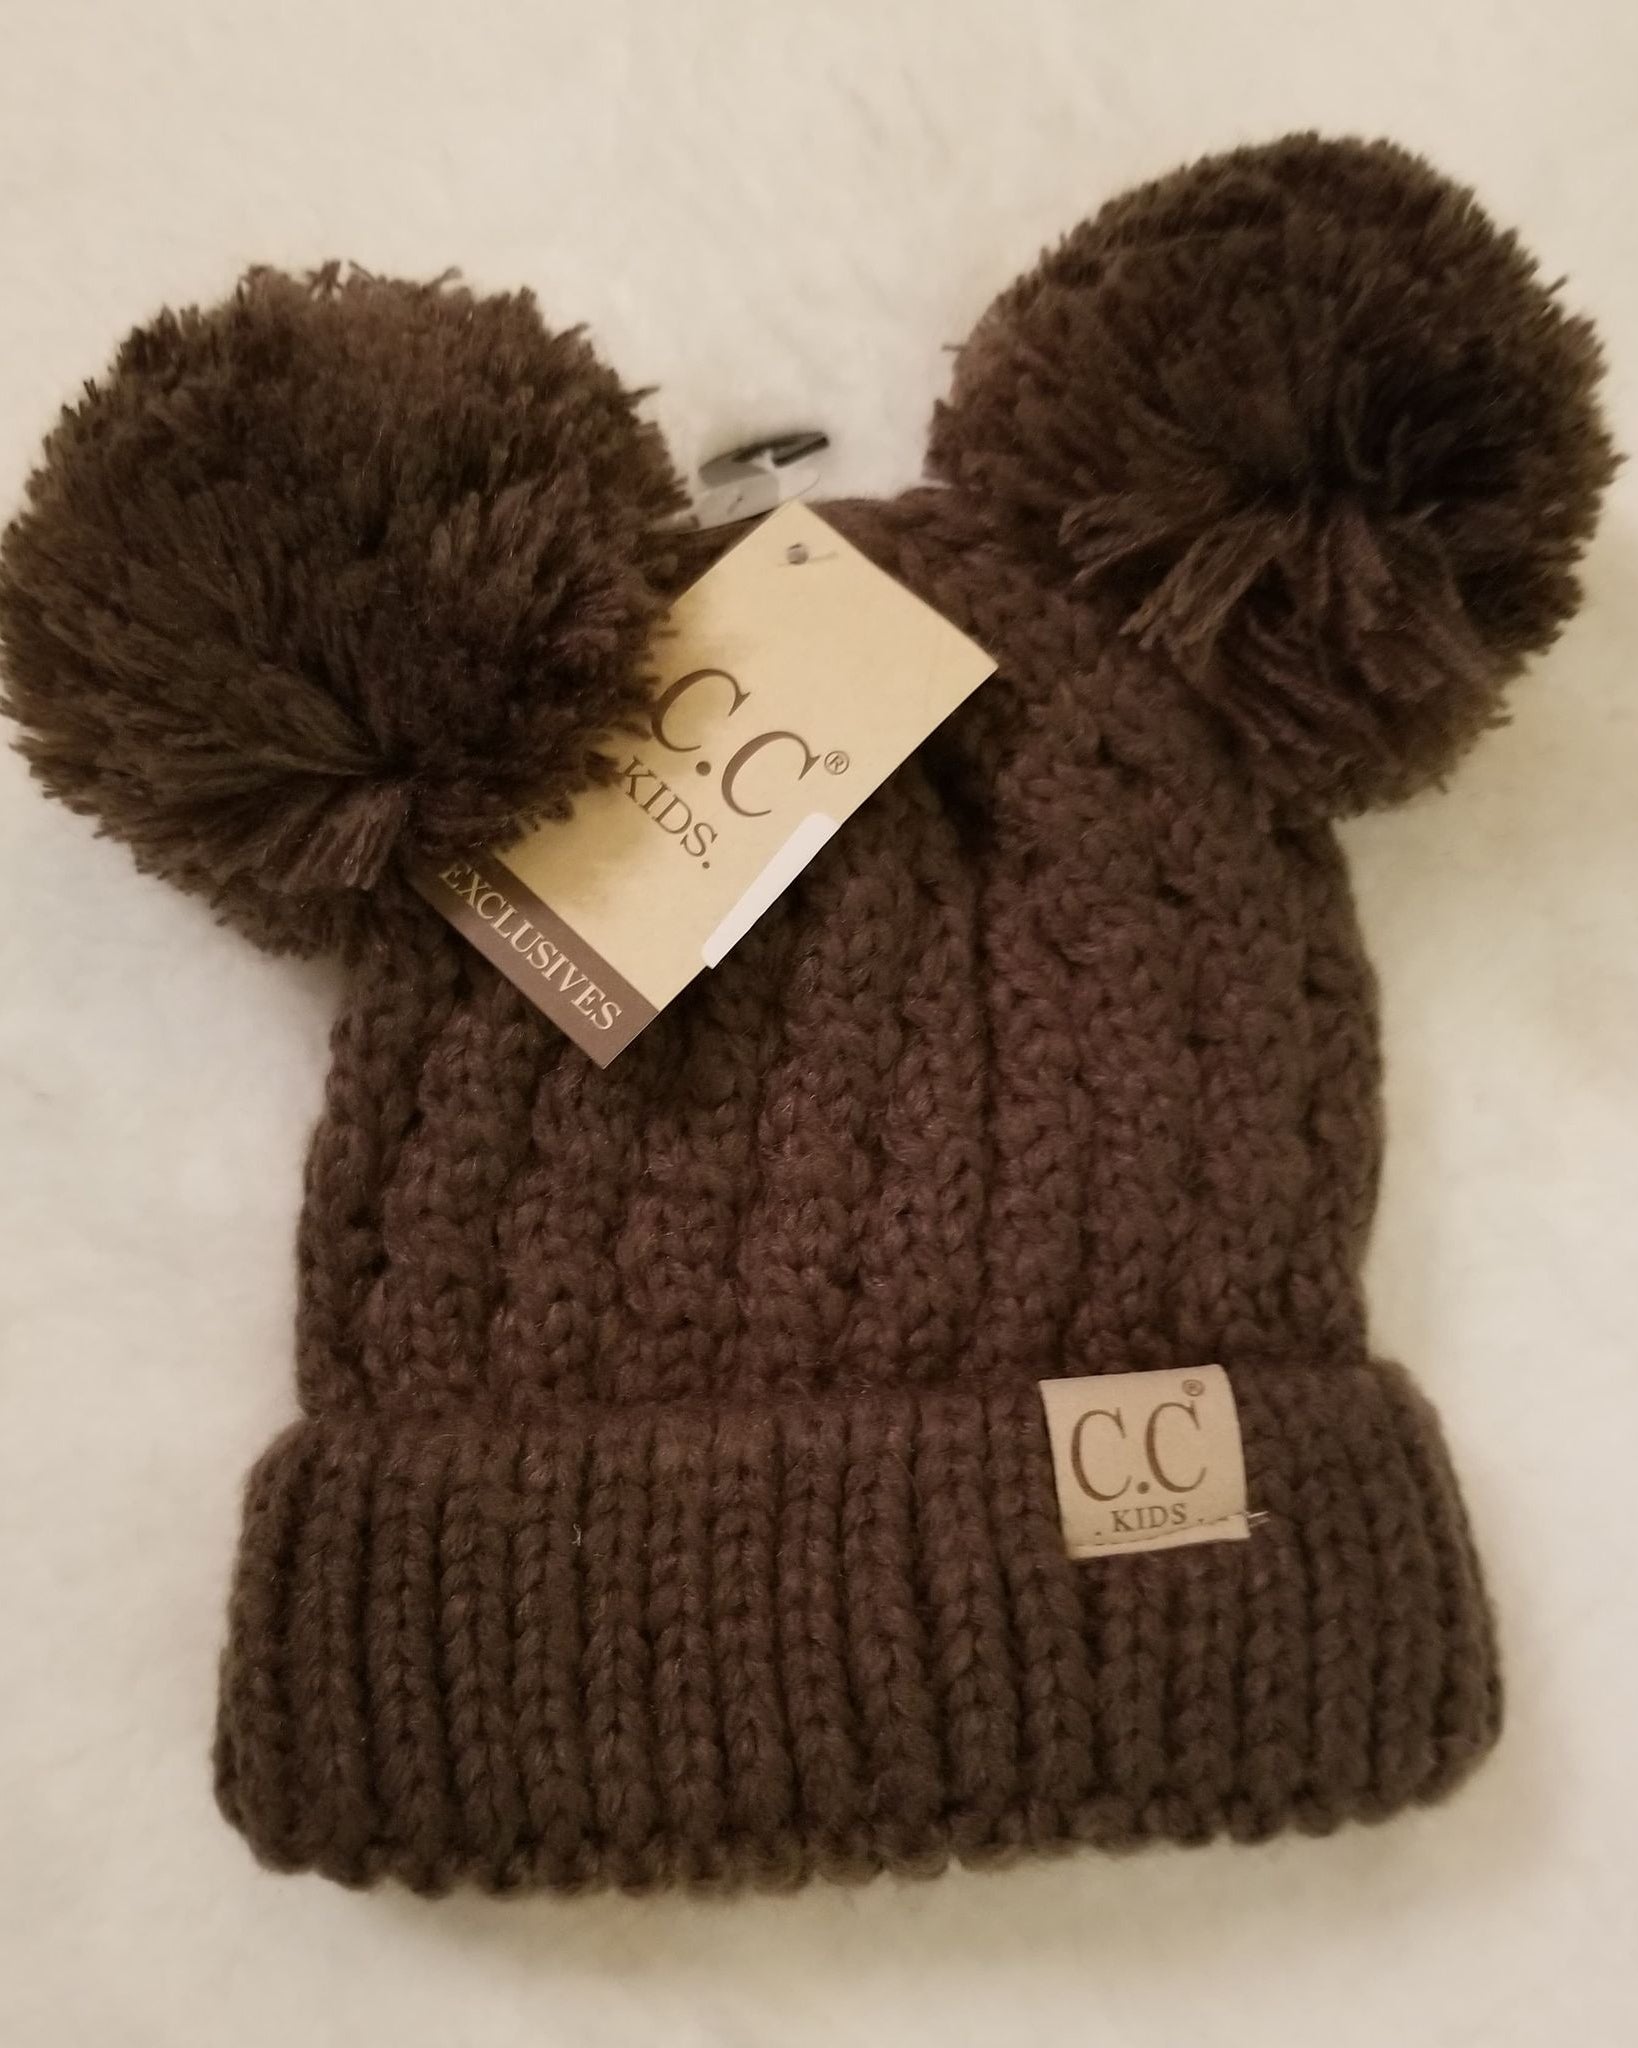 Kids Solid Double Pom CC hat- additional colors  A Touch of Magnolia Boutique New Olive  